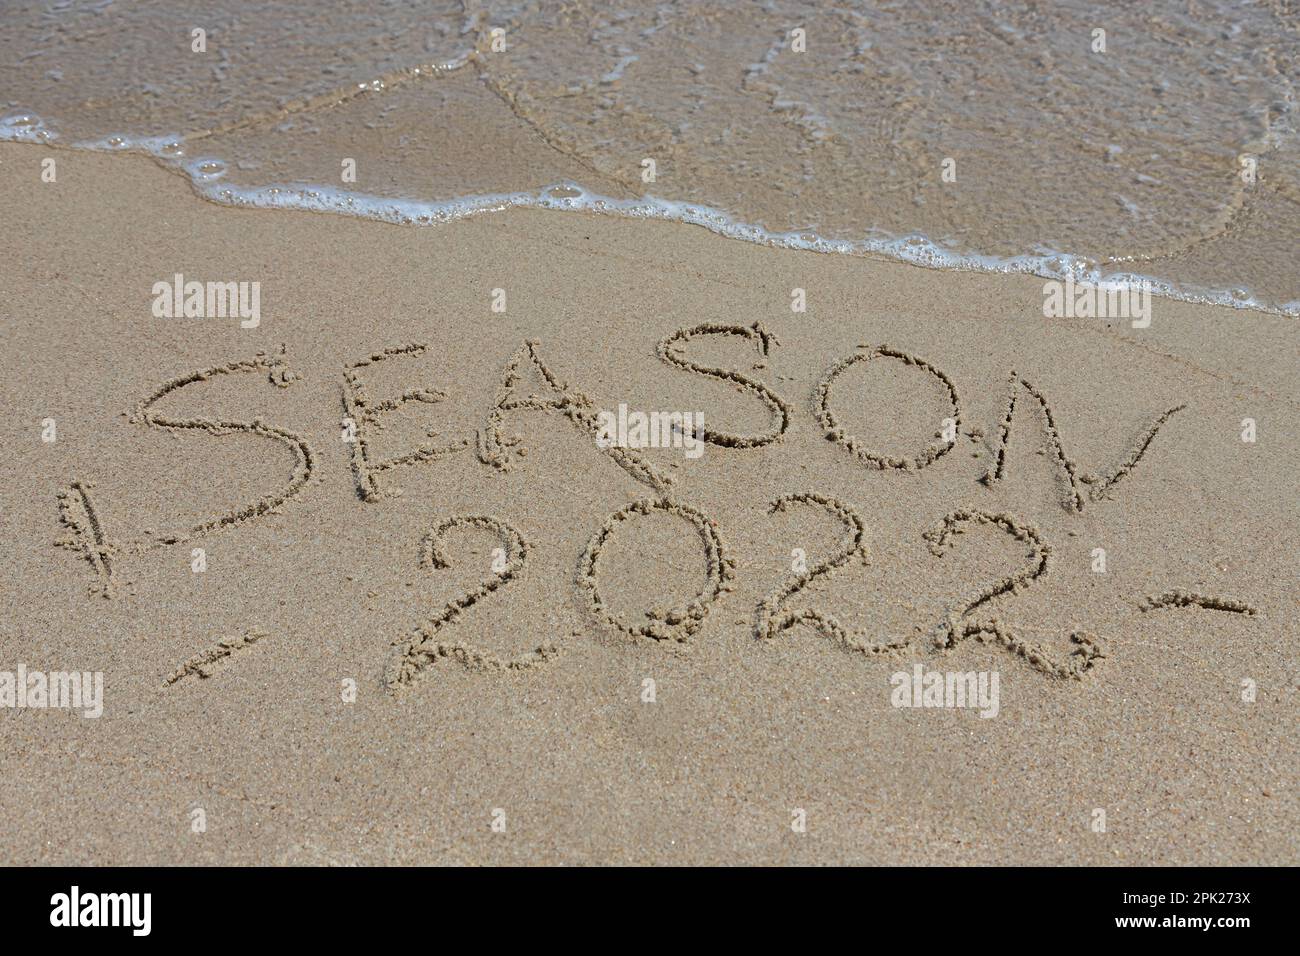 The inscription season 2022 on the sand by the water and the rising wave, seashore beach vacation by the sea. Stock Photo